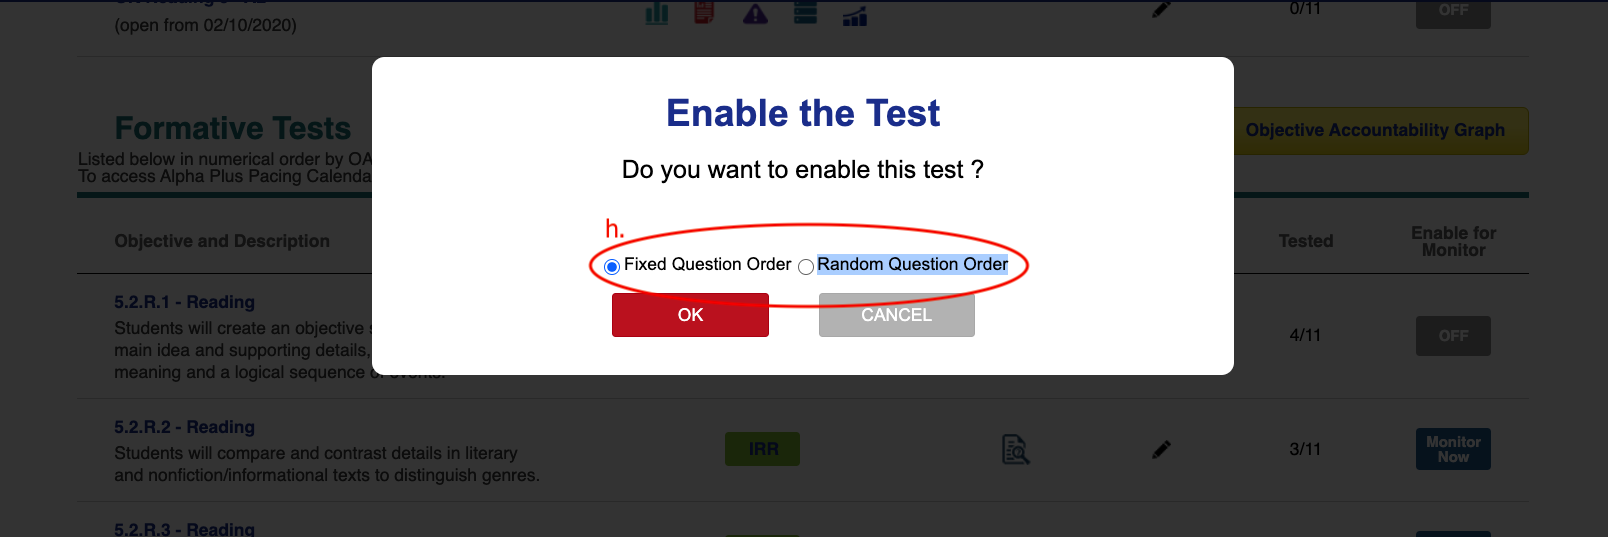 Formative Tests - Question Order